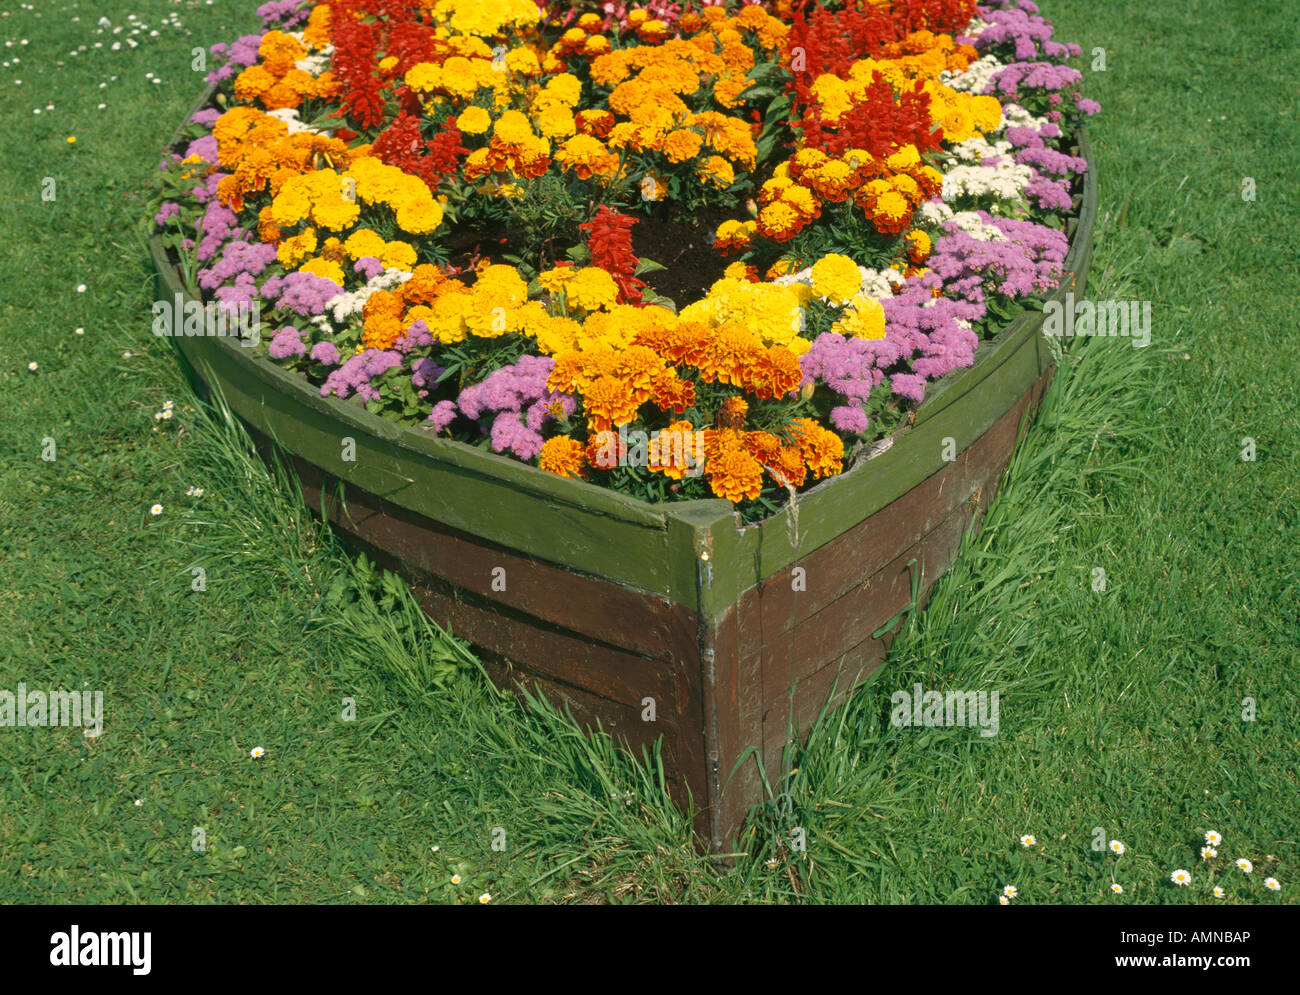 marigold flowers growing in rowing boat hull in garden Stock Photo